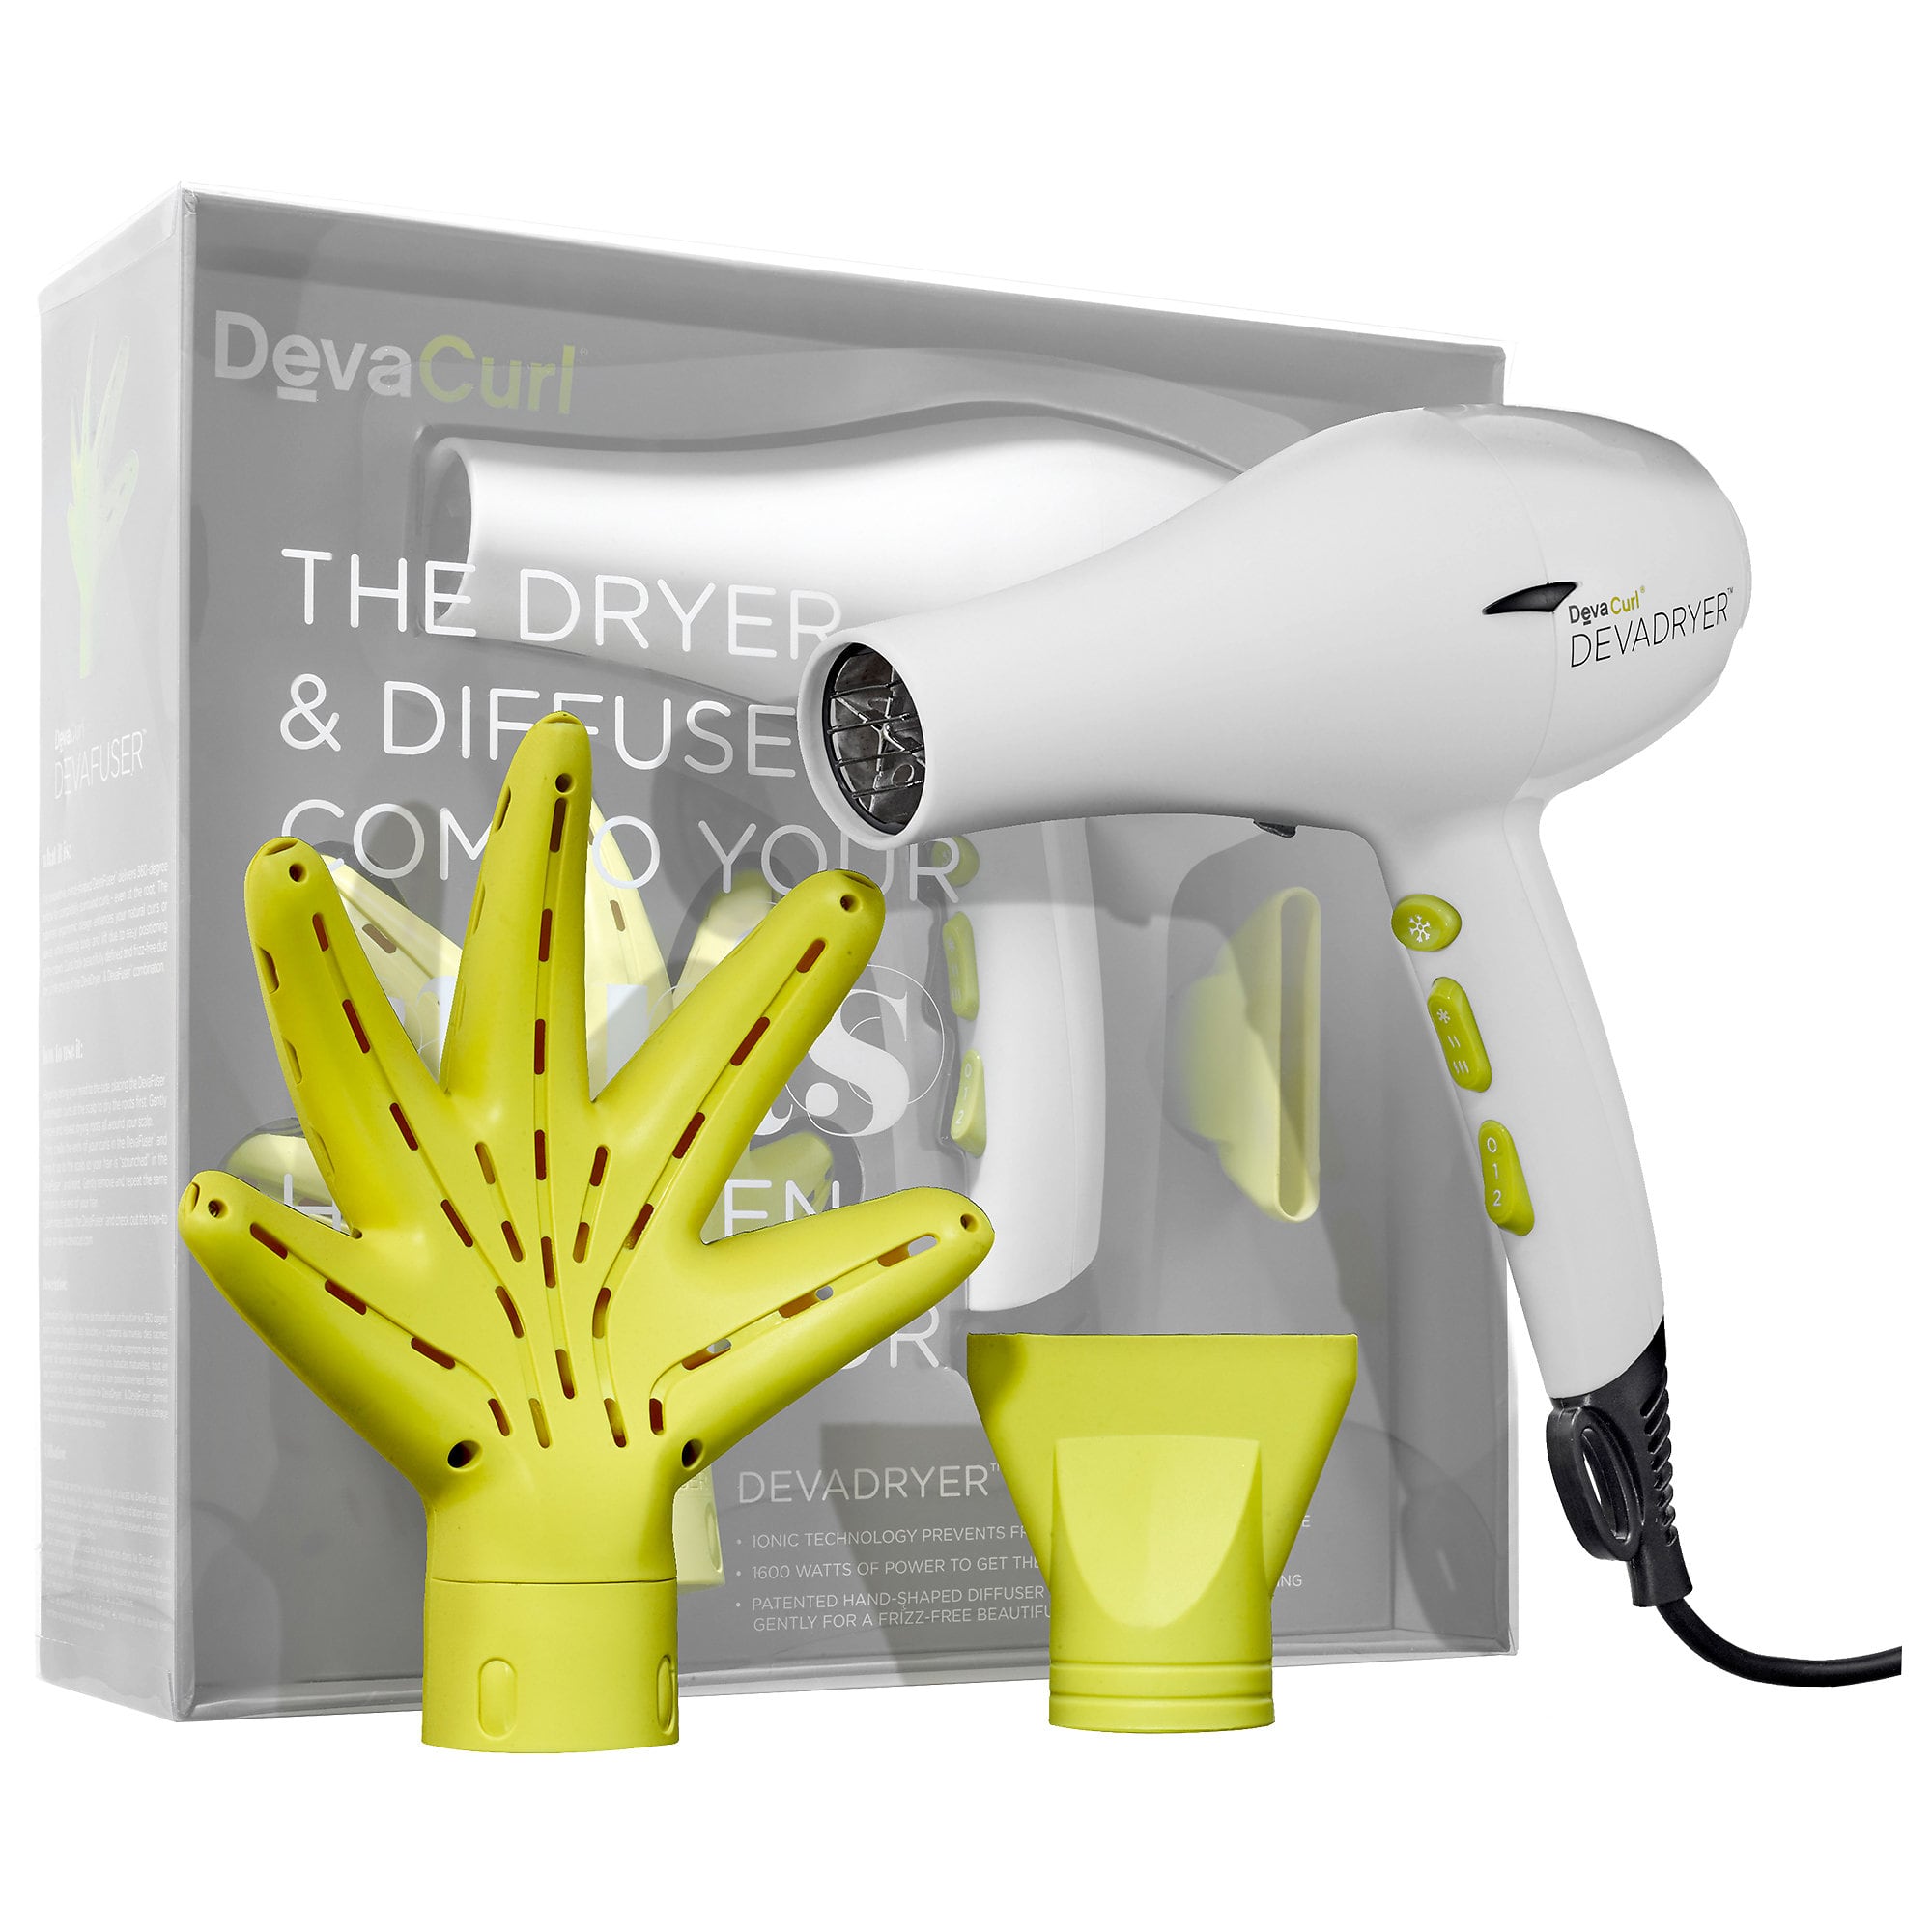 Review, Photos, Ingredients, Hairstyle, Haircare Trend 2018, 2019, 2020: Mother's Day Gift Guide, Dyson, Drybar, T3, GHD, Devacurl, Amika